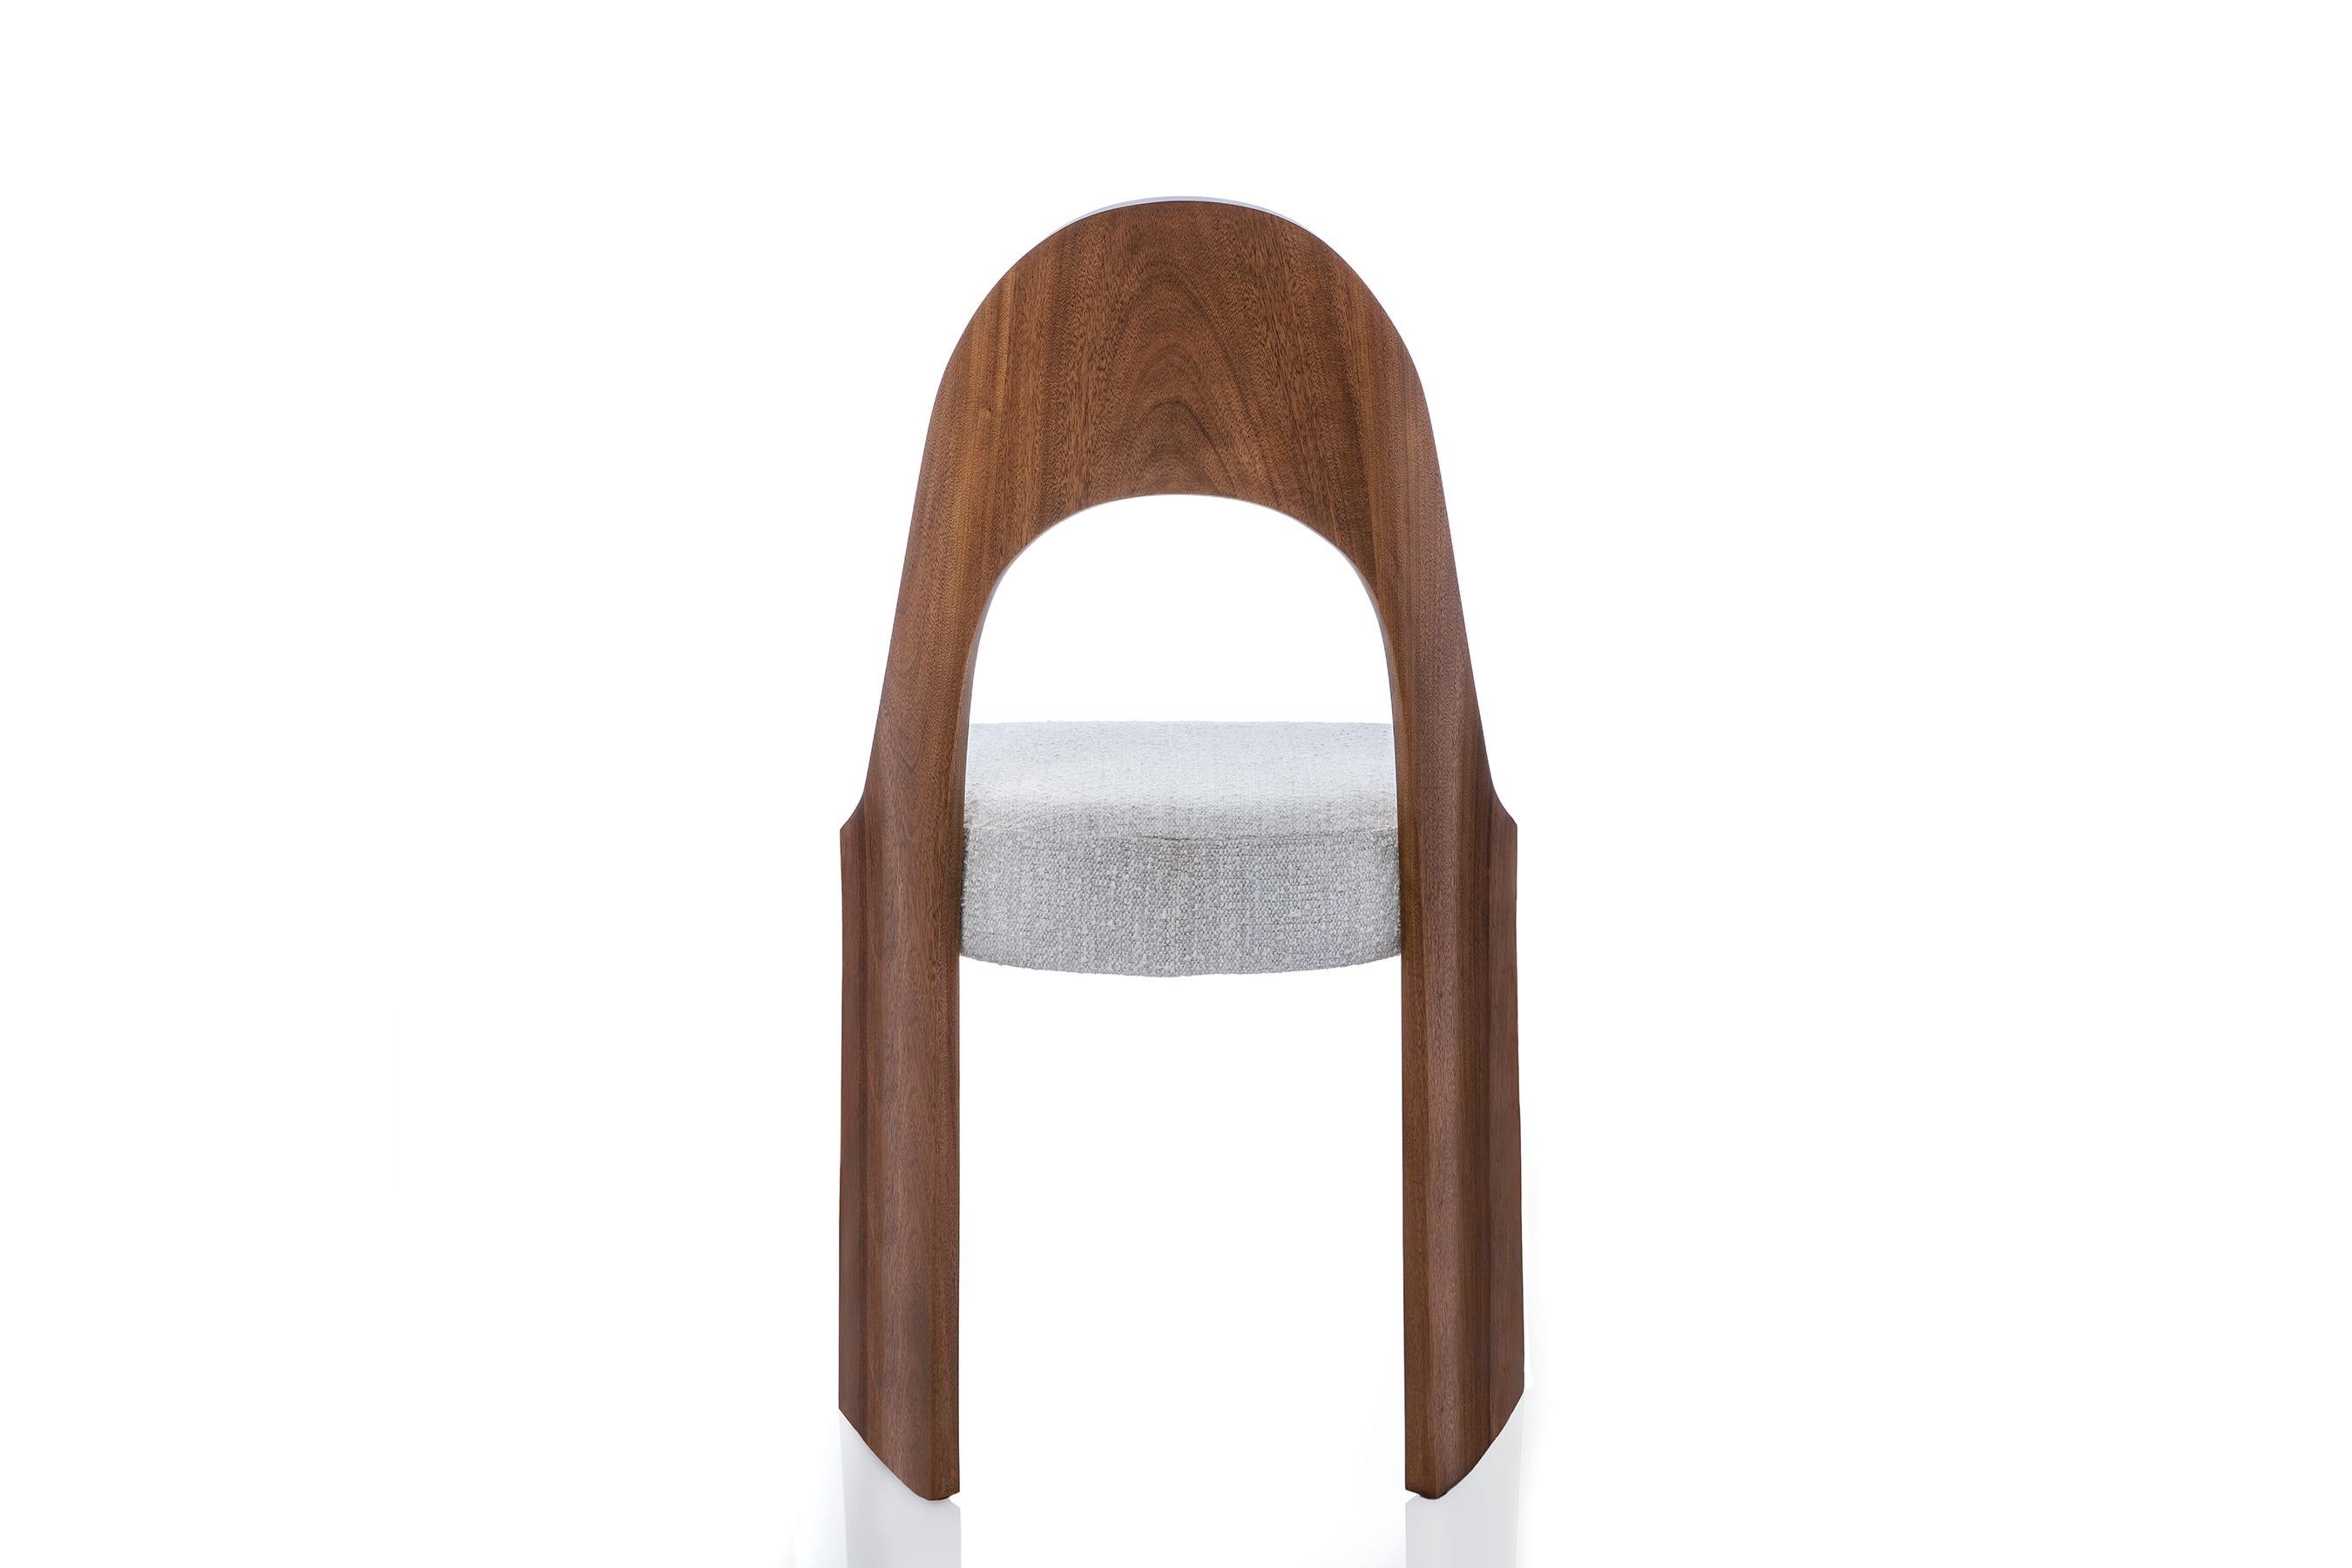 The Gaia chair is ideal as a dining side chair, but could be placed as a “slipper” almost anywhere for a stylish accent or convenient seating. A close look reveals subtle “compound” curves. The arched back, for example, has a gentle slope which runs